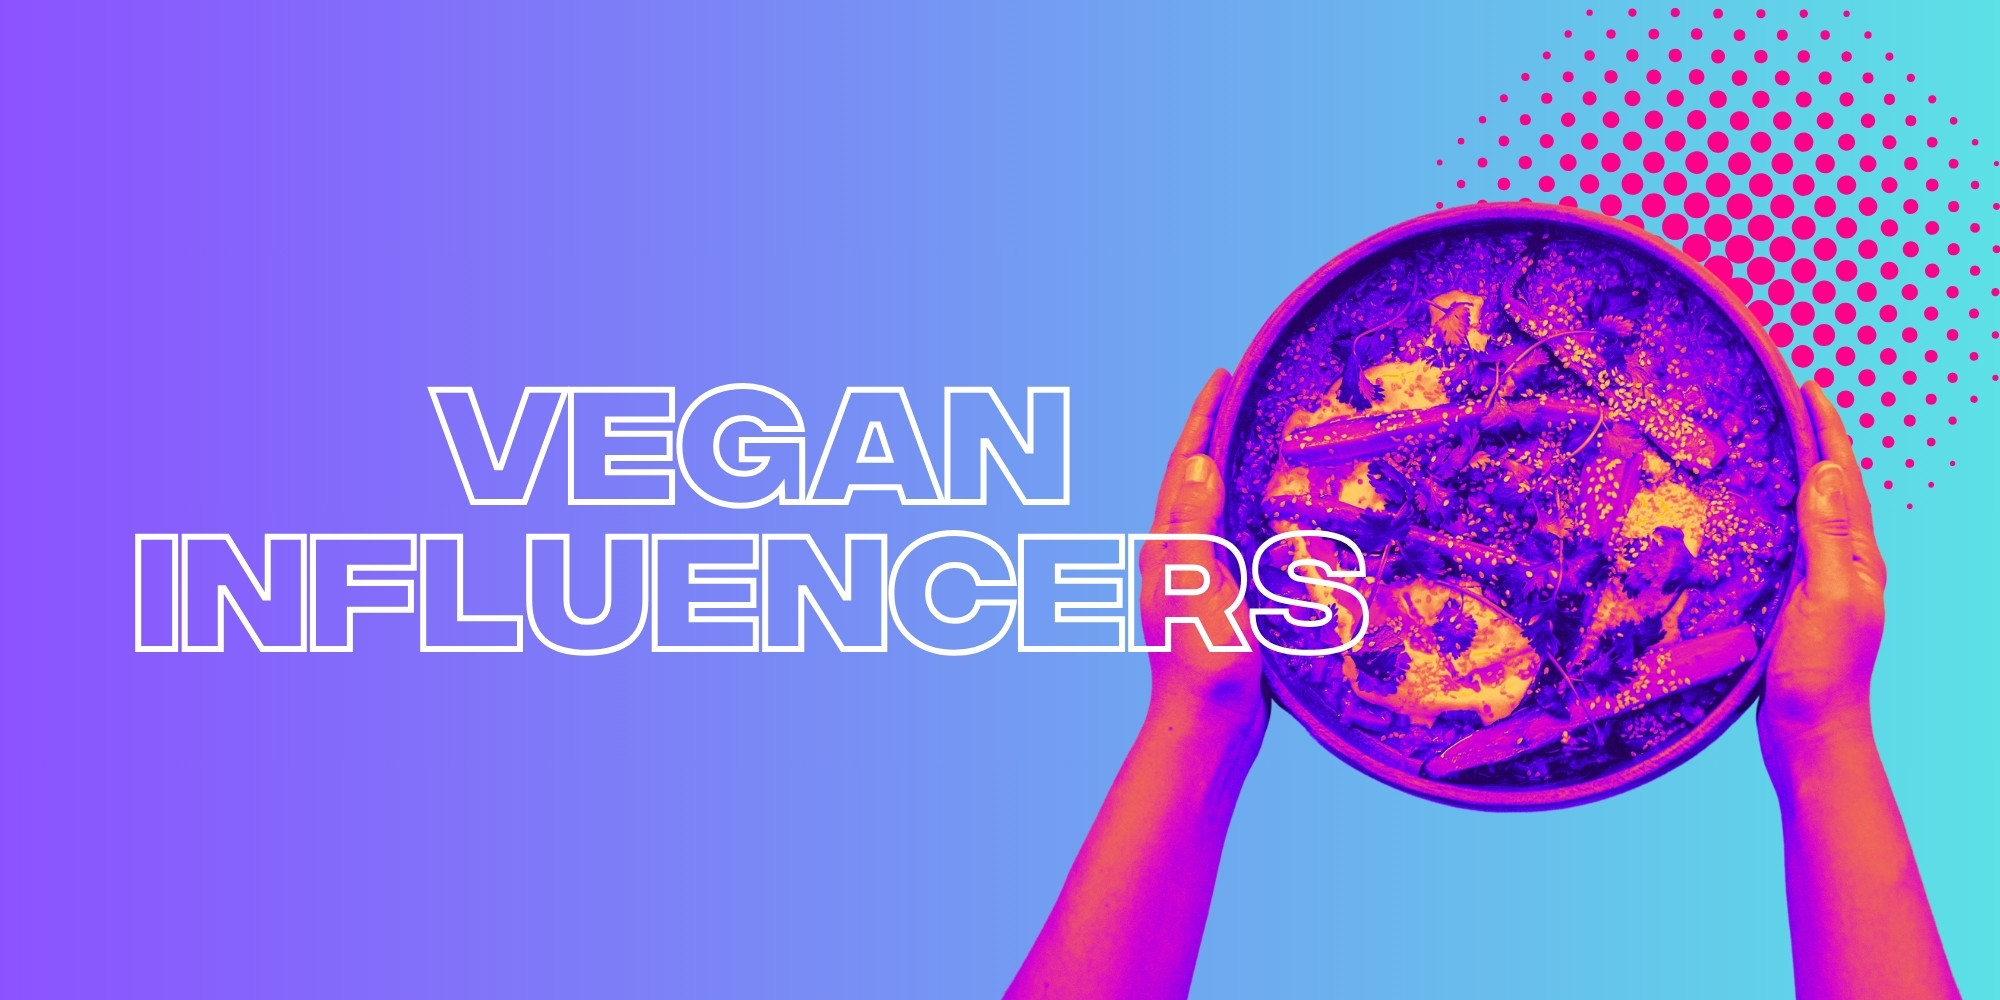 These Are The Vegan Influencers To Follow This Veganuary